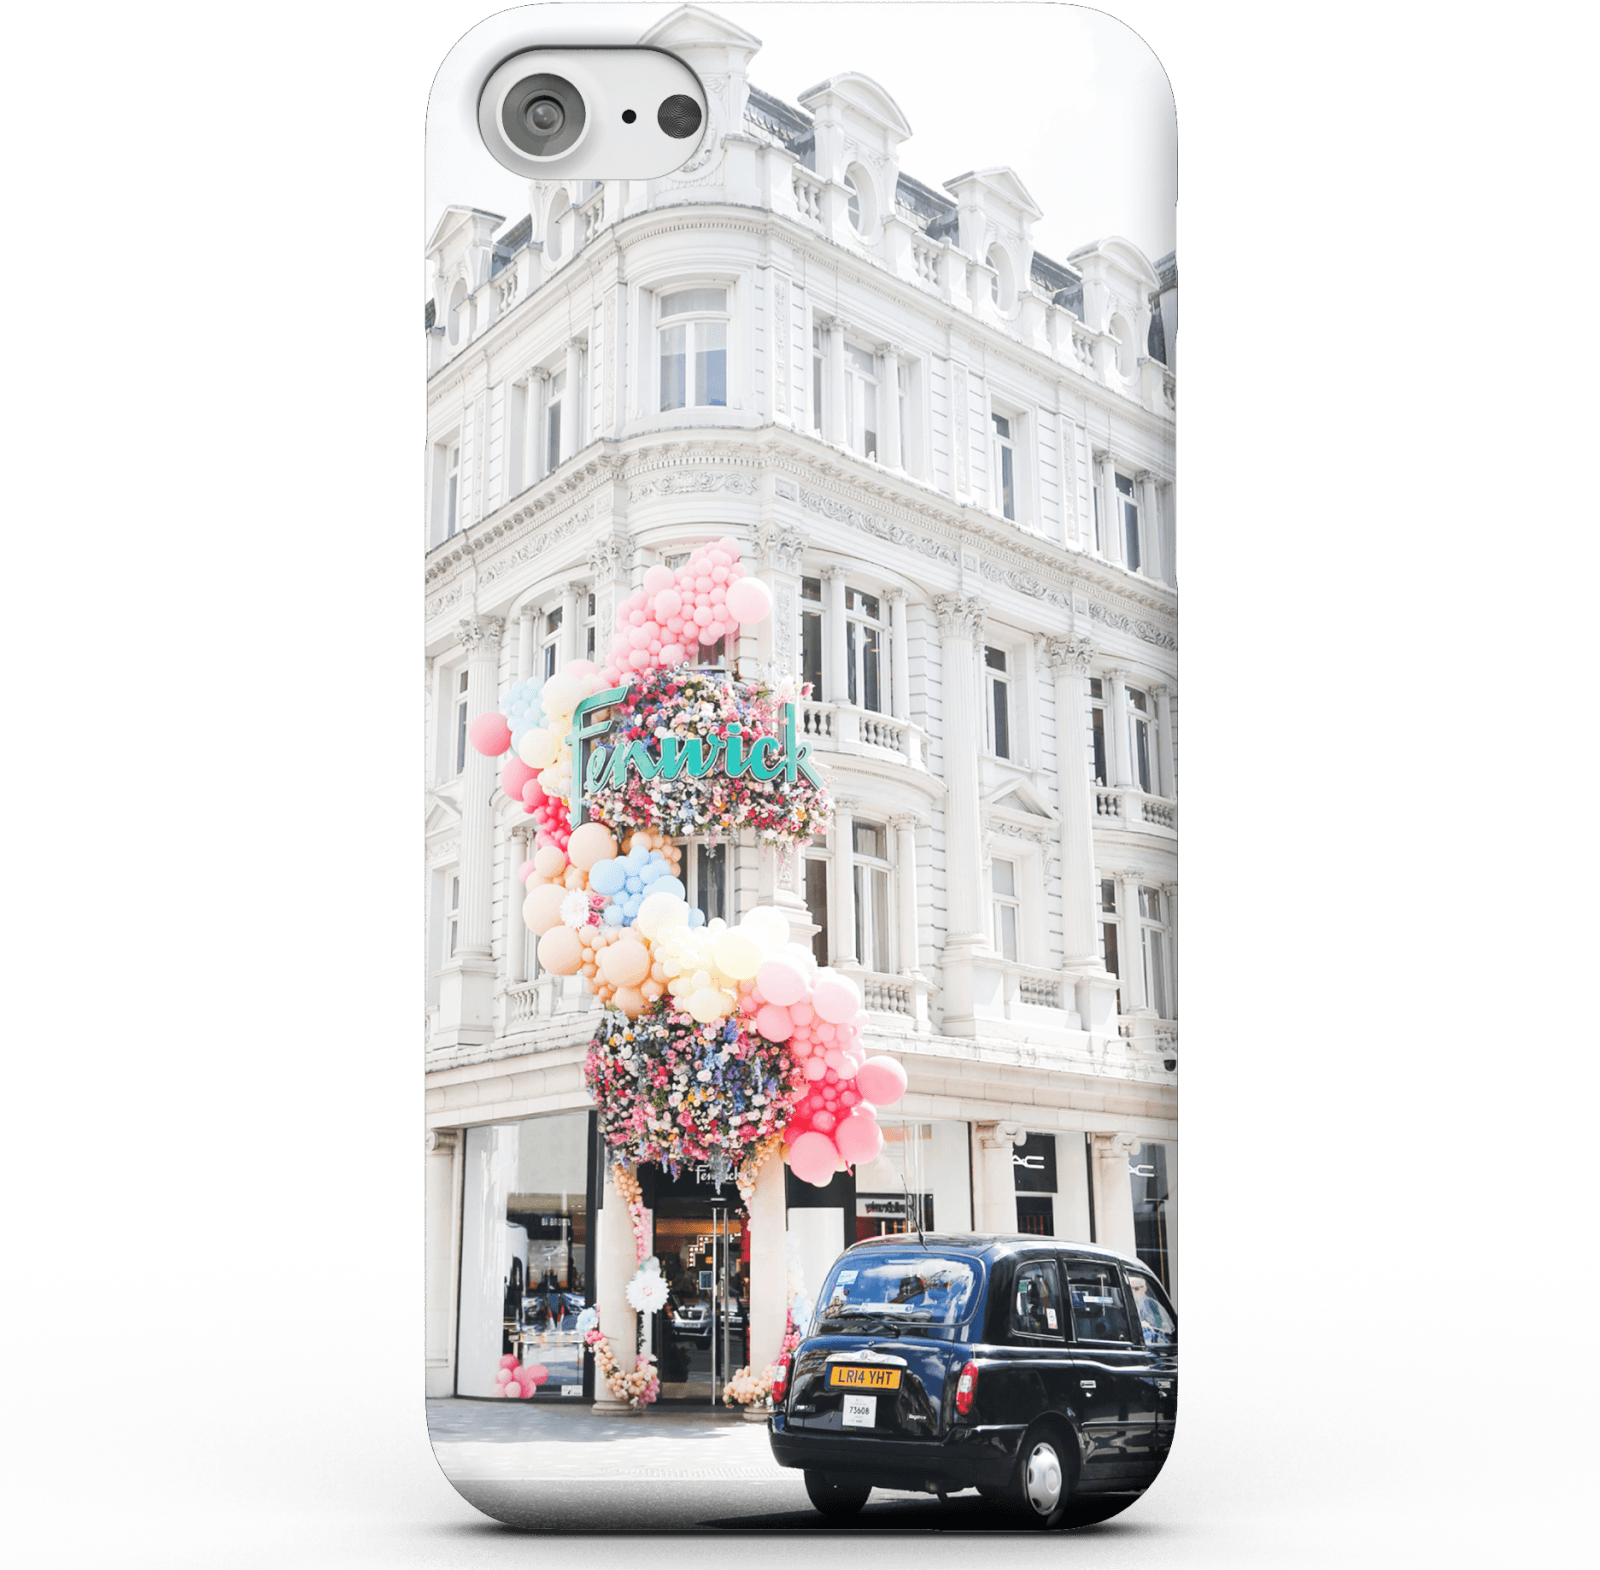 Taxi Drop Off Phone Case for iPhone and Android - iPhone 5/5s - Snap Case - Matte